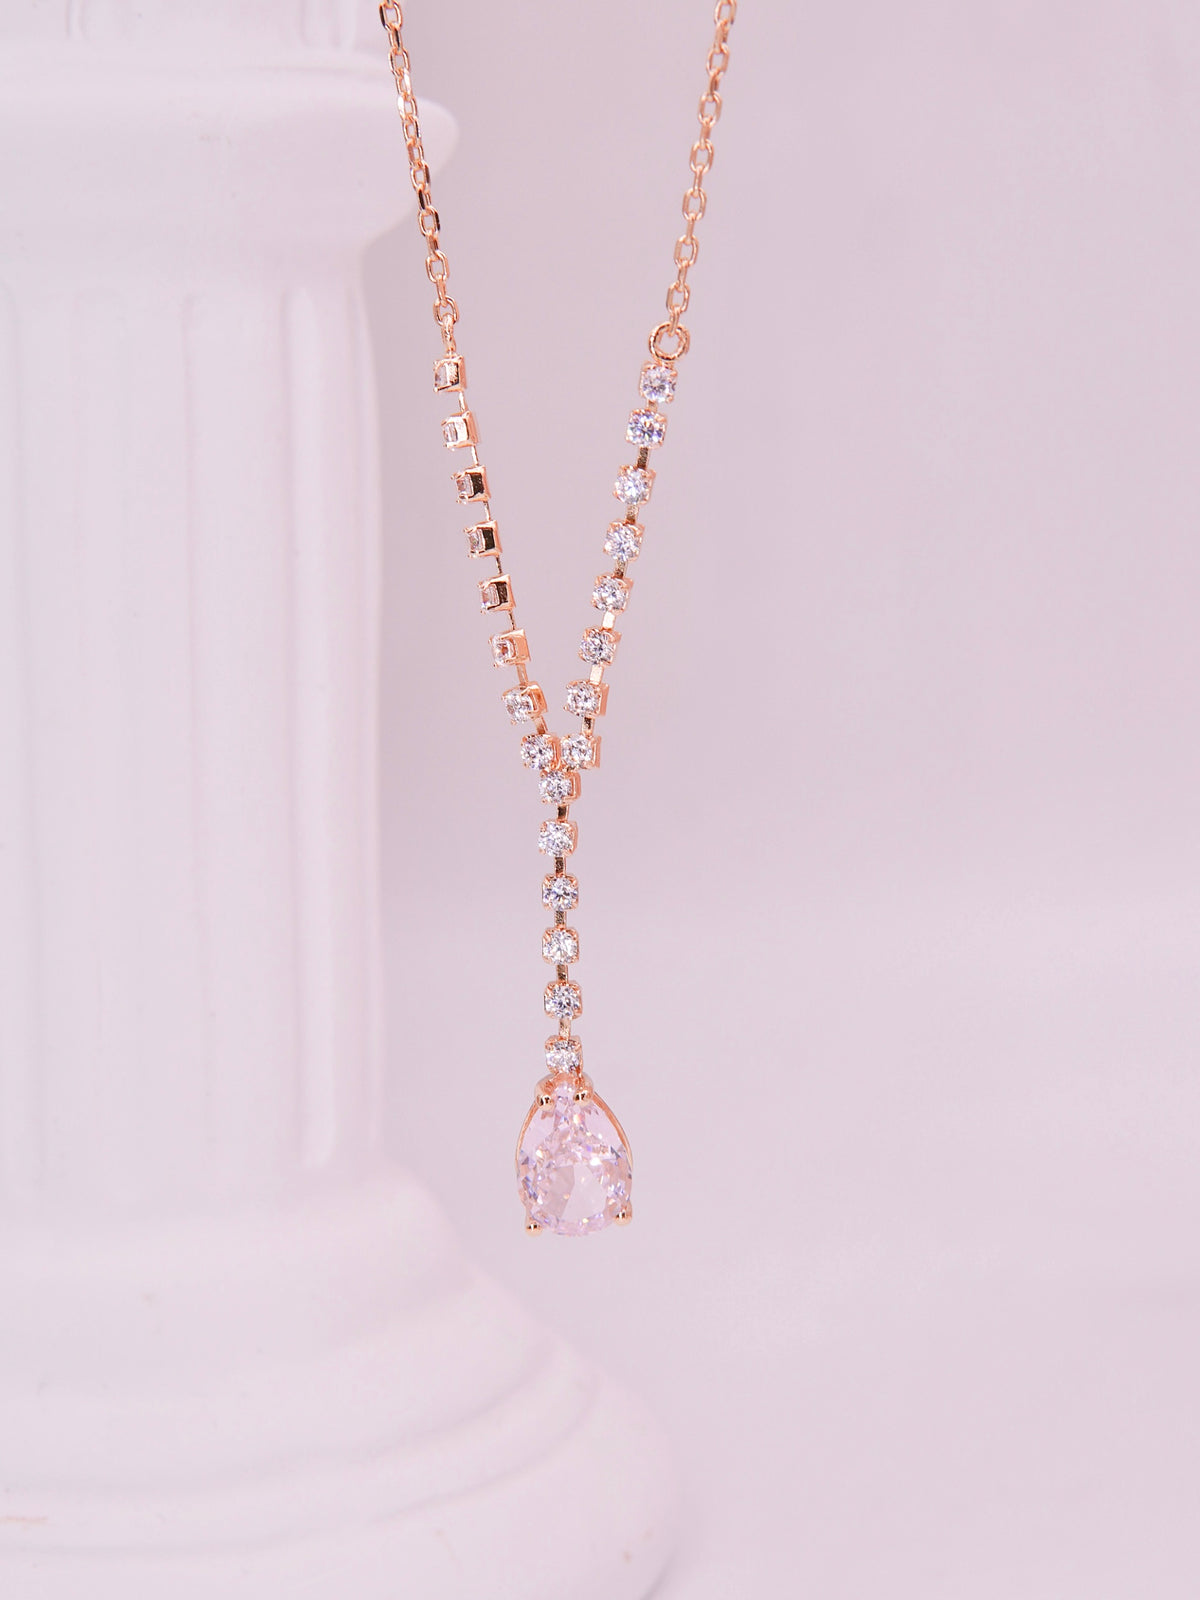 LAFIT· Rosy Mermaid - Necklace 仙氣公主櫻花粉摩根石頸鏈